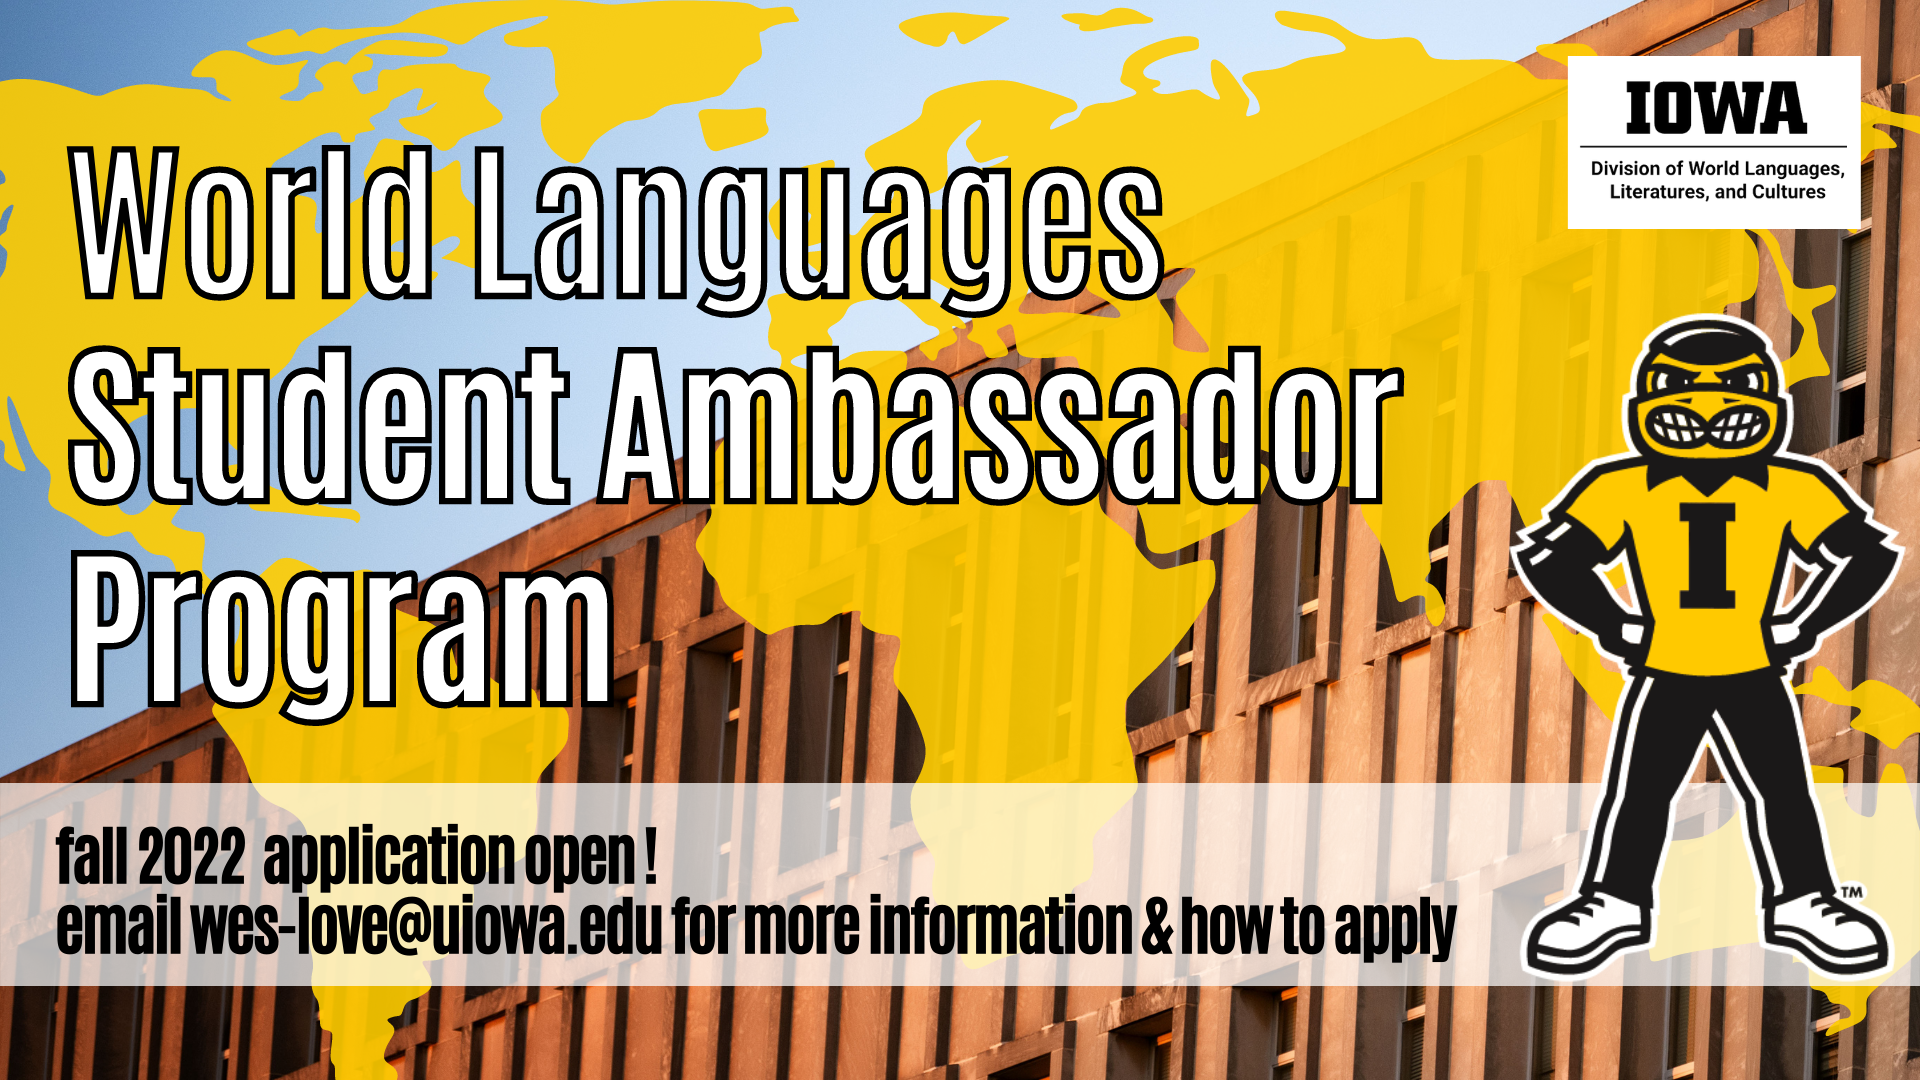 World languages student ambassador program fall 2022 applications are open please email Wes–love@iowa.edu for more information and how to apply